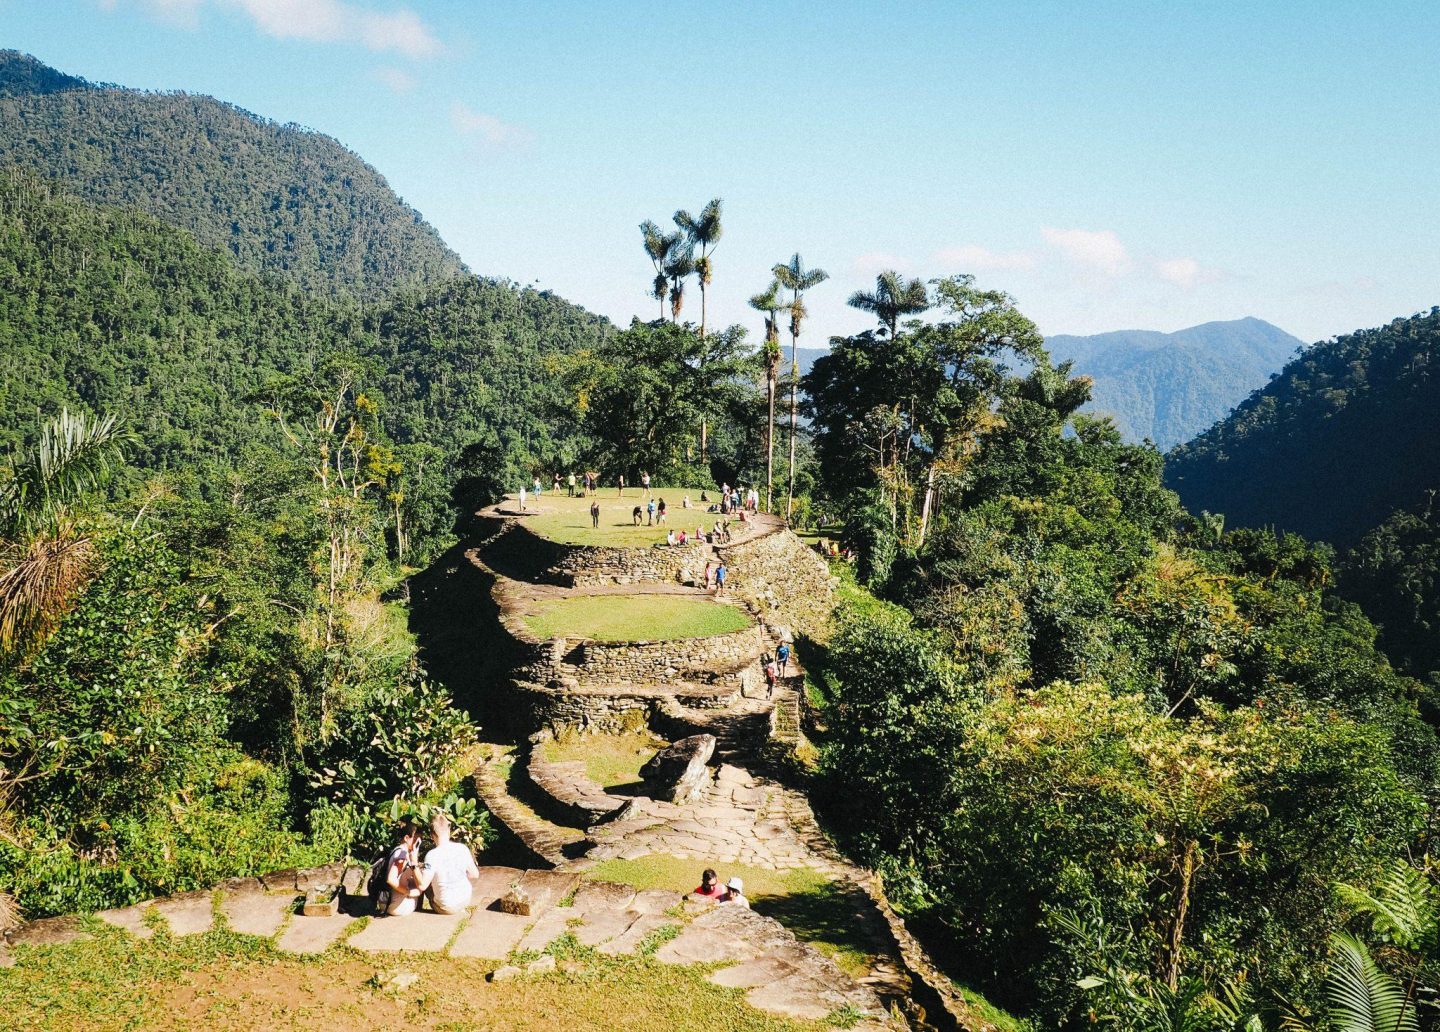 trekking Colombia Colombian Guides | The Complete Guide to The Lost City Trek